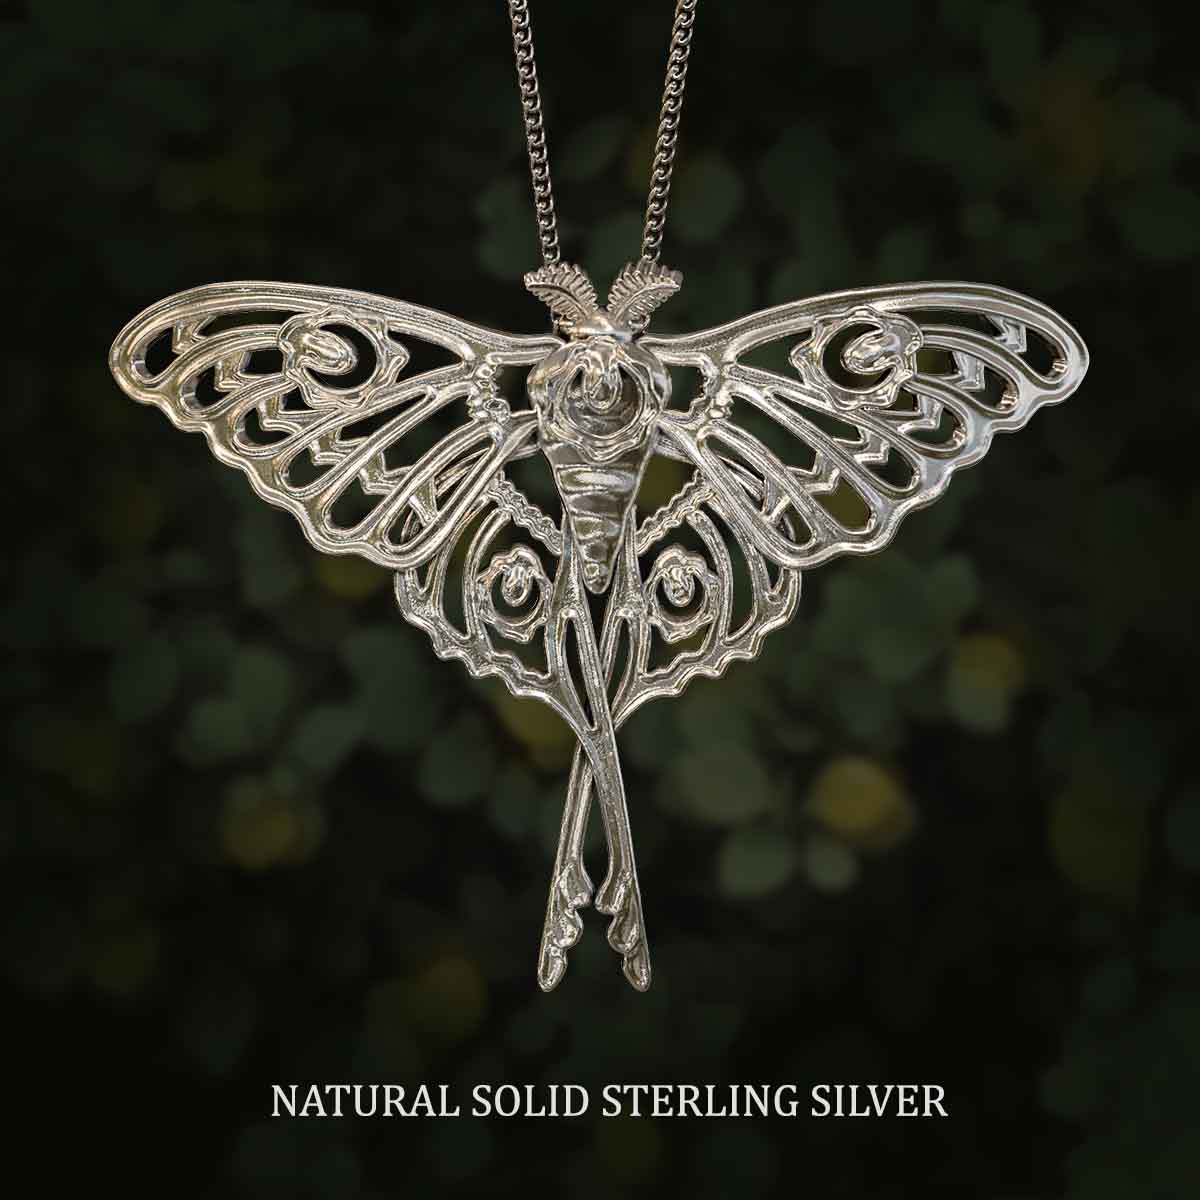 Natural-Satin-Polish-Solid-Sterling-Silver-Comet-Moth-Pendant-Jewelry-For-Necklace